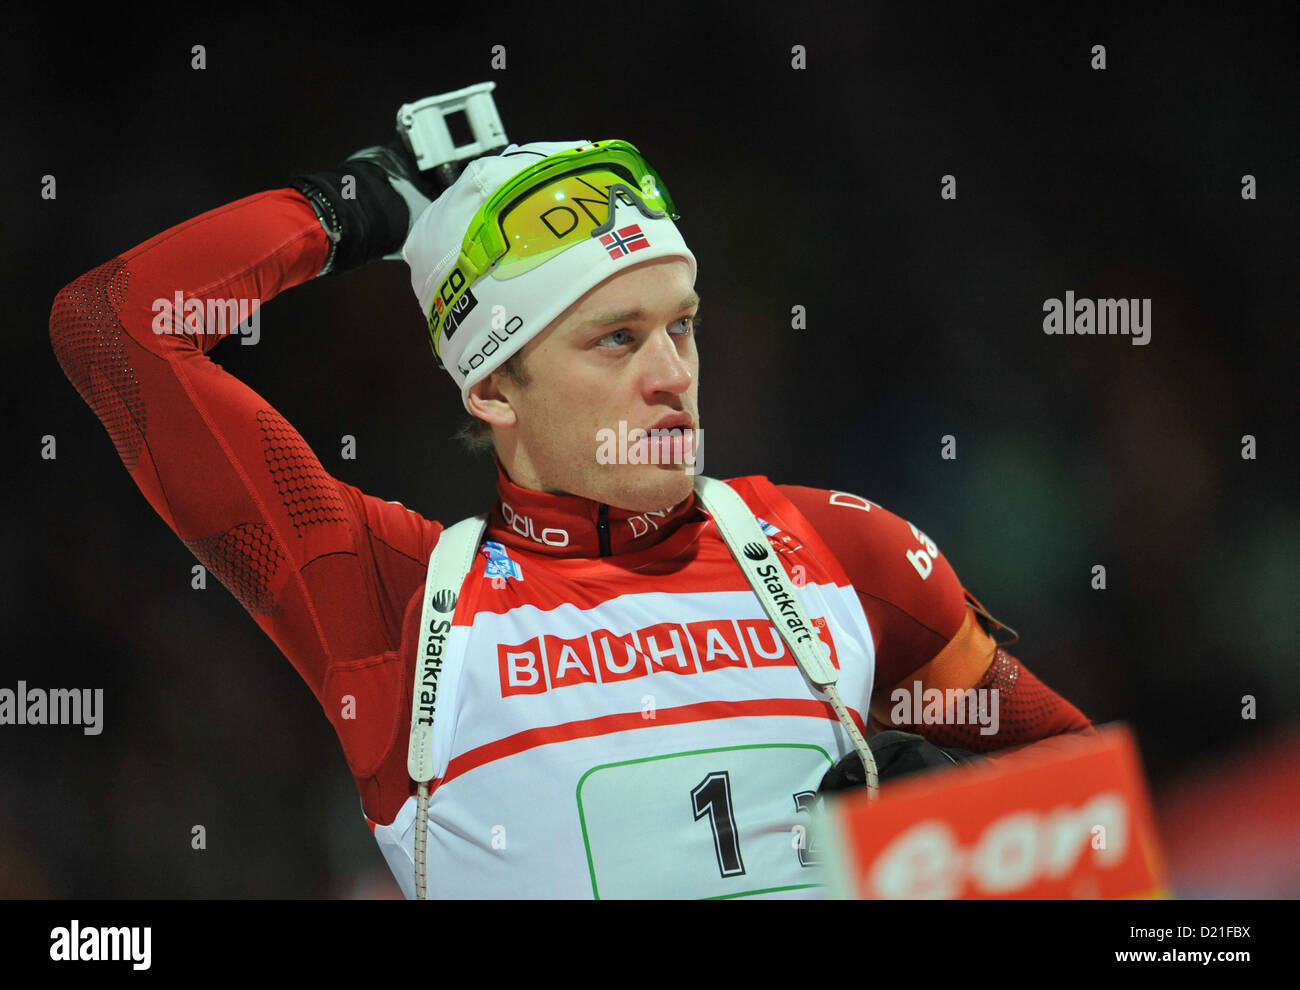 Norwegian biathlete Tarjei Boe stands at the shooting range during the 4 x 7.5 km relay at the Biathlon World Cup at Chiemgau Arena in Ruhpolding, Germany, 10 January 2013. Photo: ANDREAS GEBERT Stock Photo